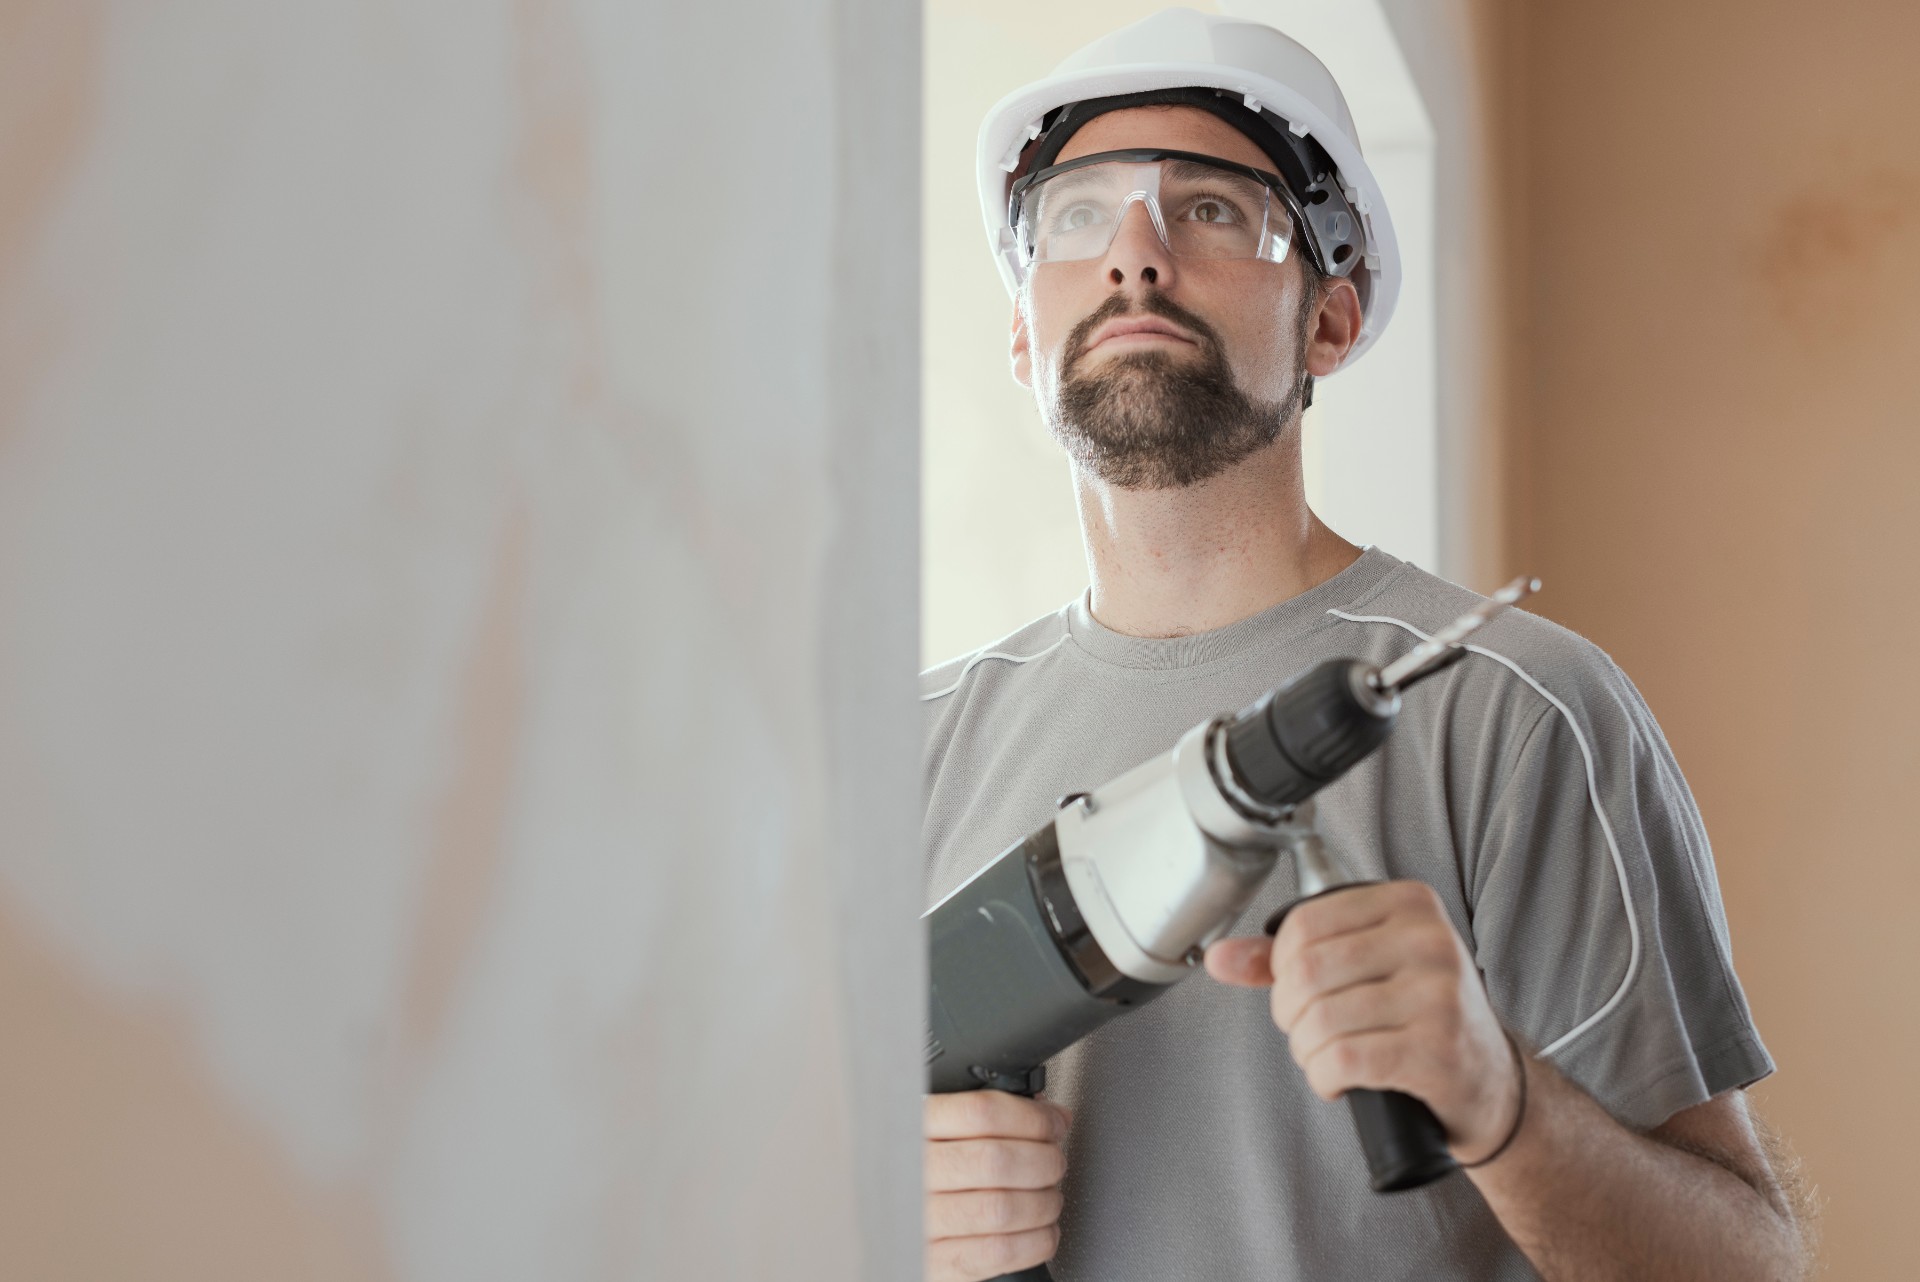 Professional construction worker using a drill, he is wearing a safety helmet and goggles